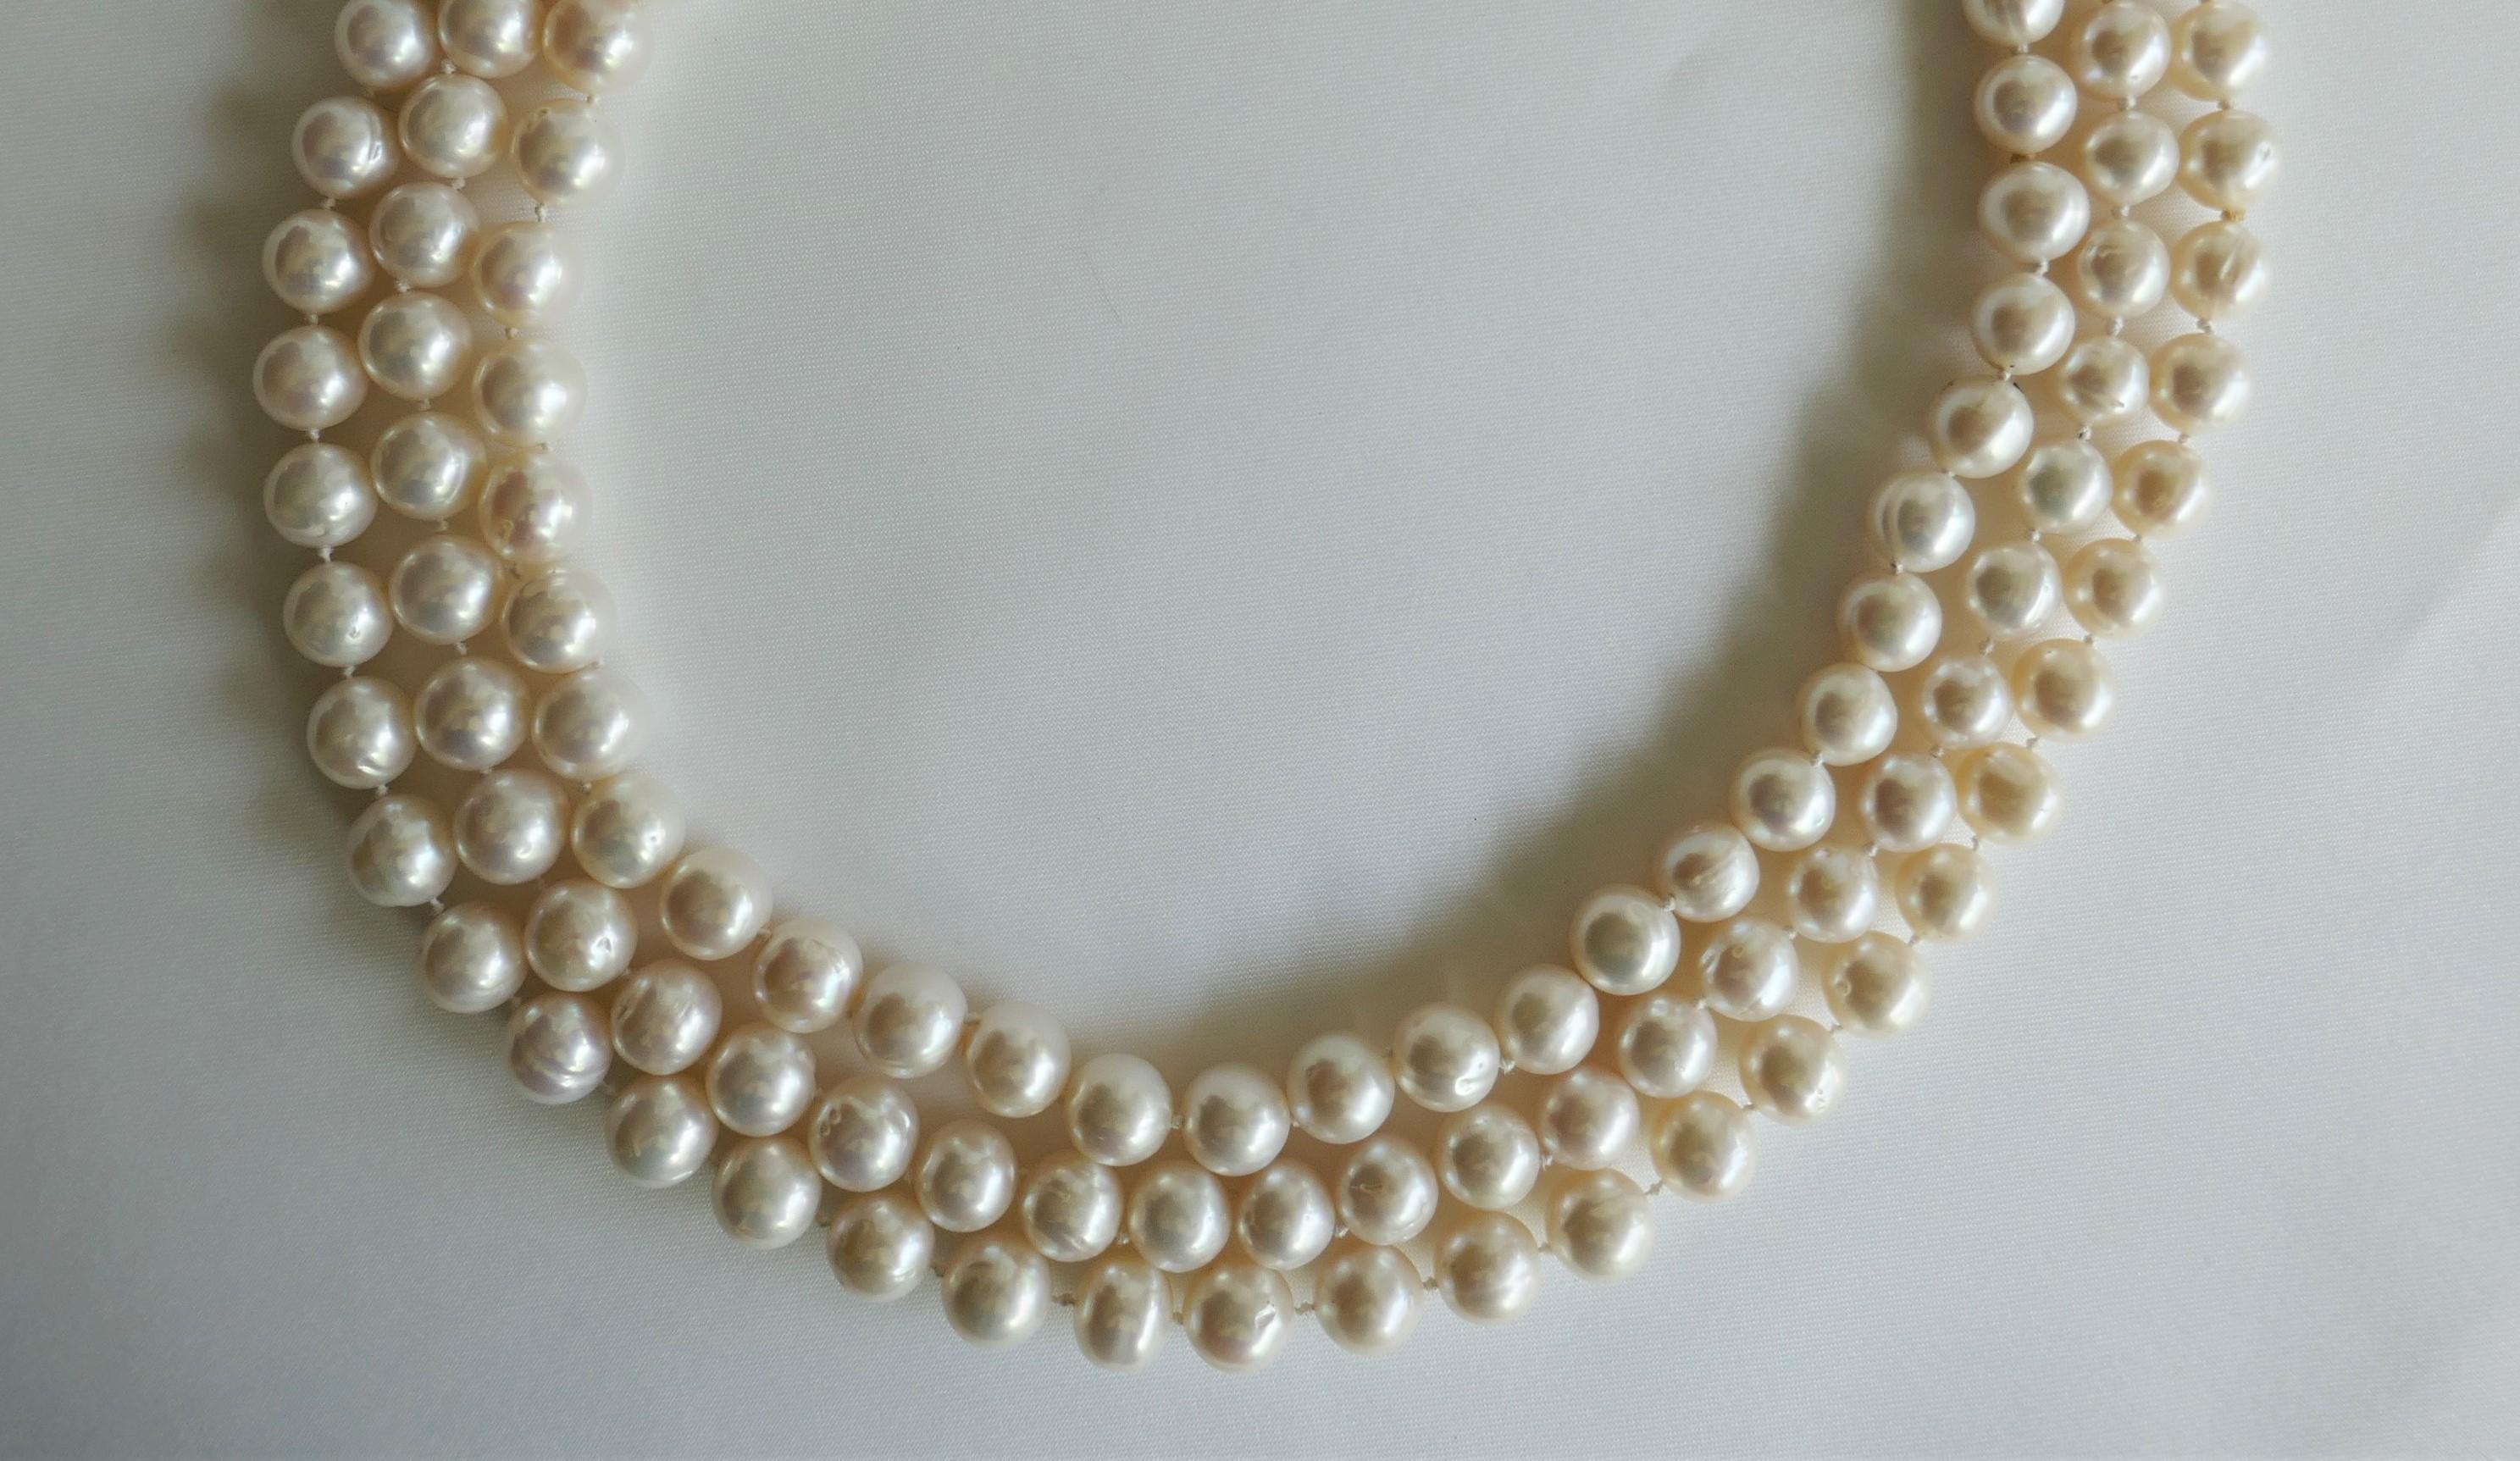 Three Strand White Cultured Pearls 925 Sterling Silver Necklace In New Condition For Sale In Coral Gables, FL